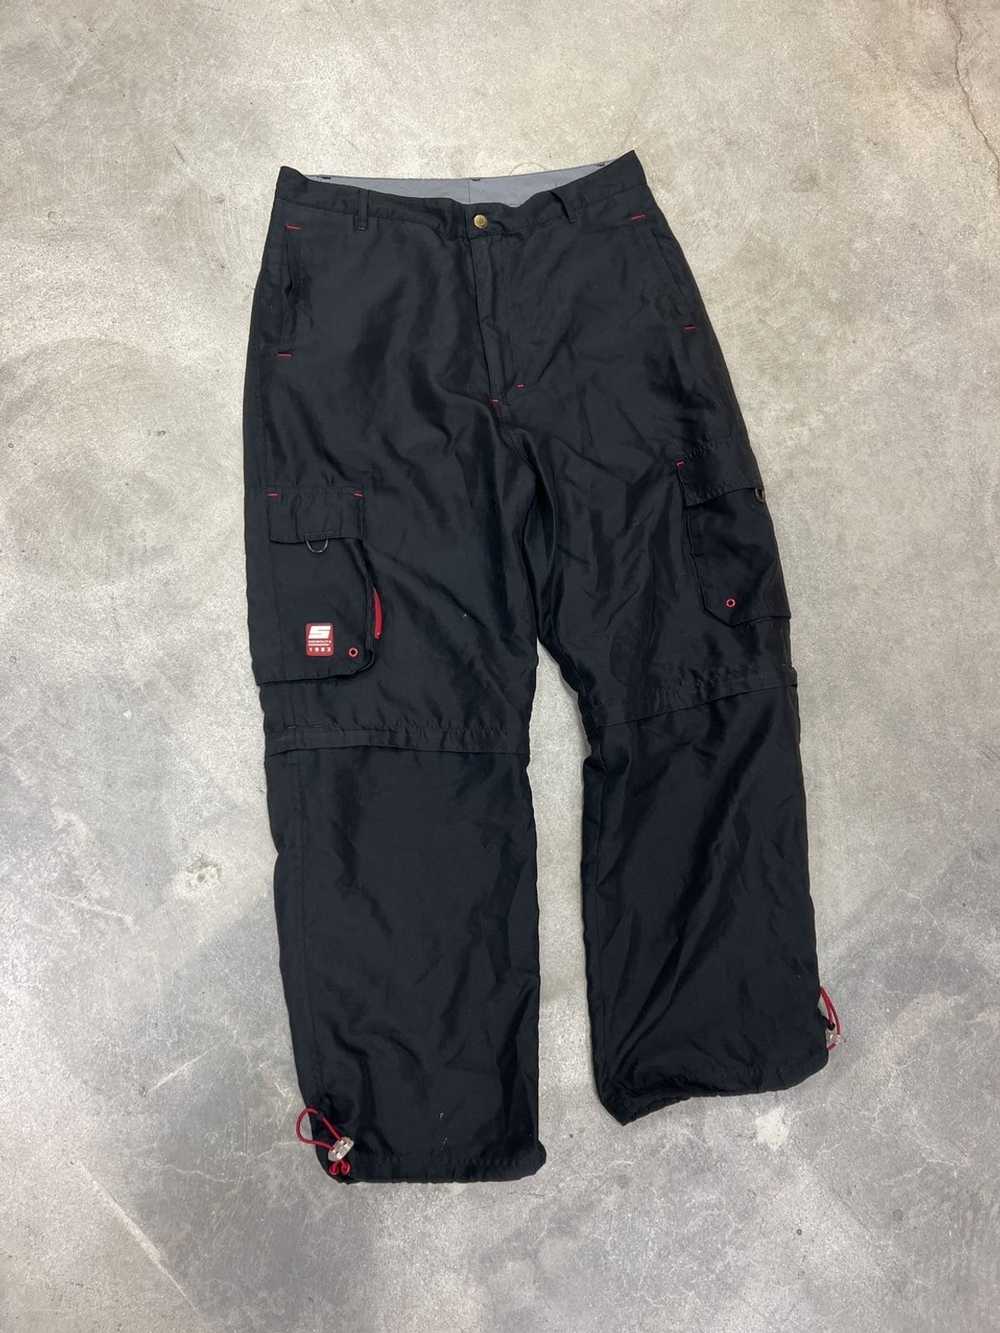 Sideout Sideout Baggy Pants - image 1